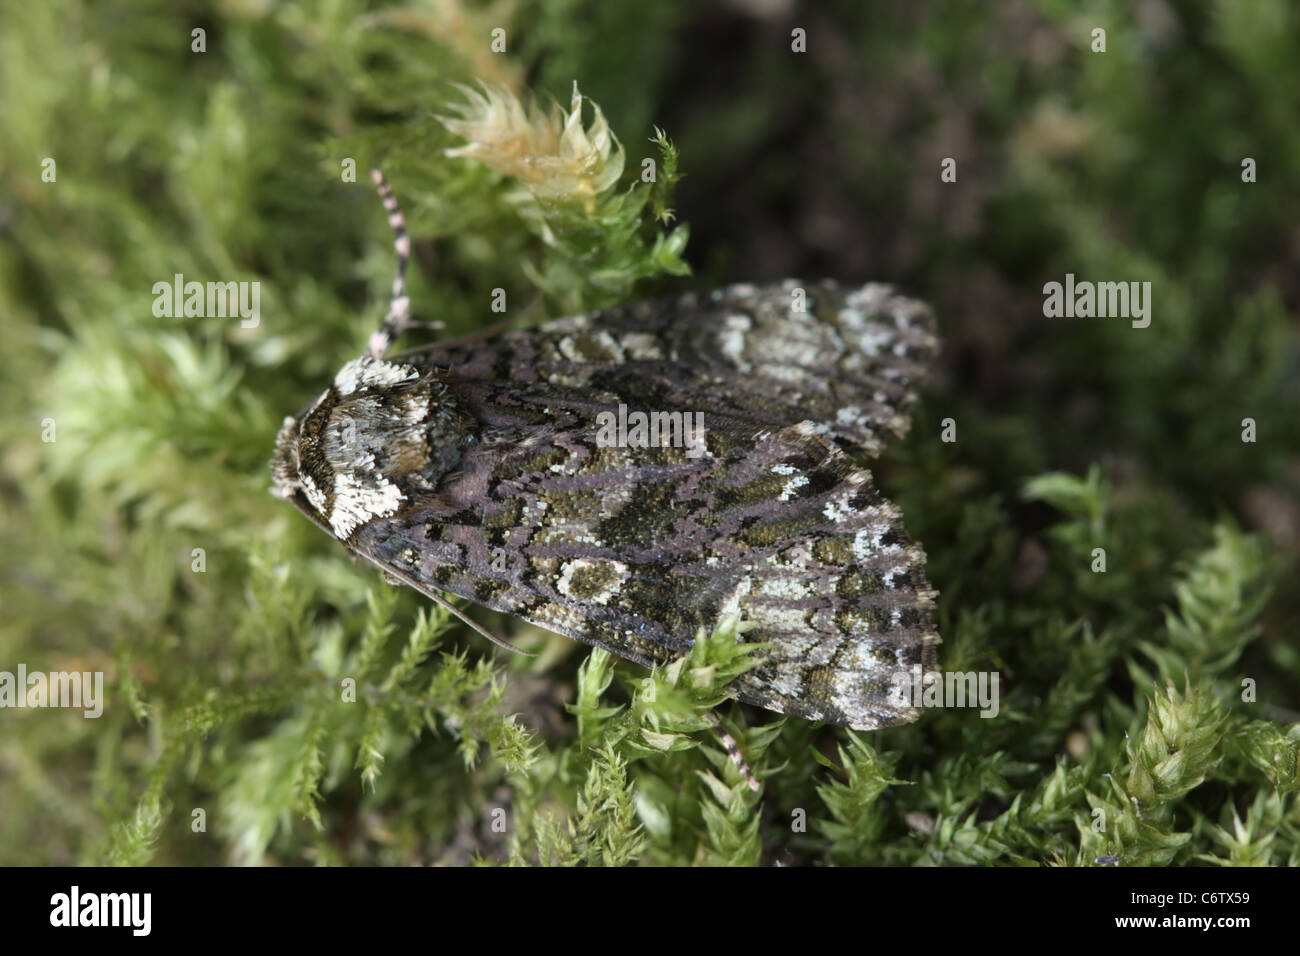 The Coronet Moth against a mossy background Stock Photo